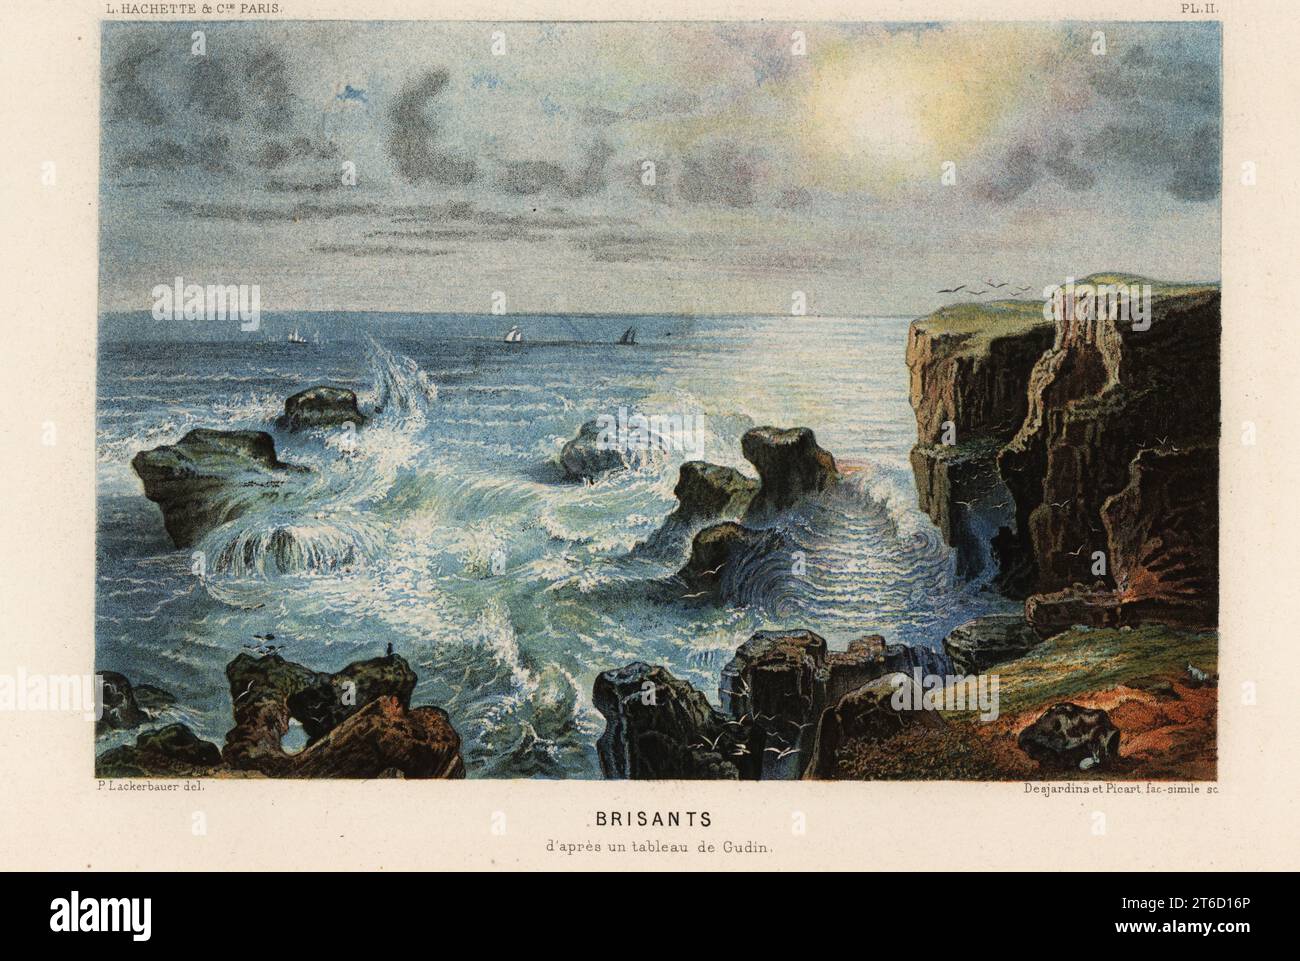 Landscape of a rough sea with waves crashing on rocks by marine artist Theodore Gudin. Brisants d'apres un tableau de Gudin. Chromolithograph by Pierre Lackerbauer from Alfred Fredols Le Monde de la Mer, the World of the Sea, edited by Olivier Fredol, Librairie Hachette et. Cie., Paris, 1881. Alfred Fredol was the pseudonym of French zoologist and botanist Alfred Moquin-Tandon, 1804-1863. Stock Photo